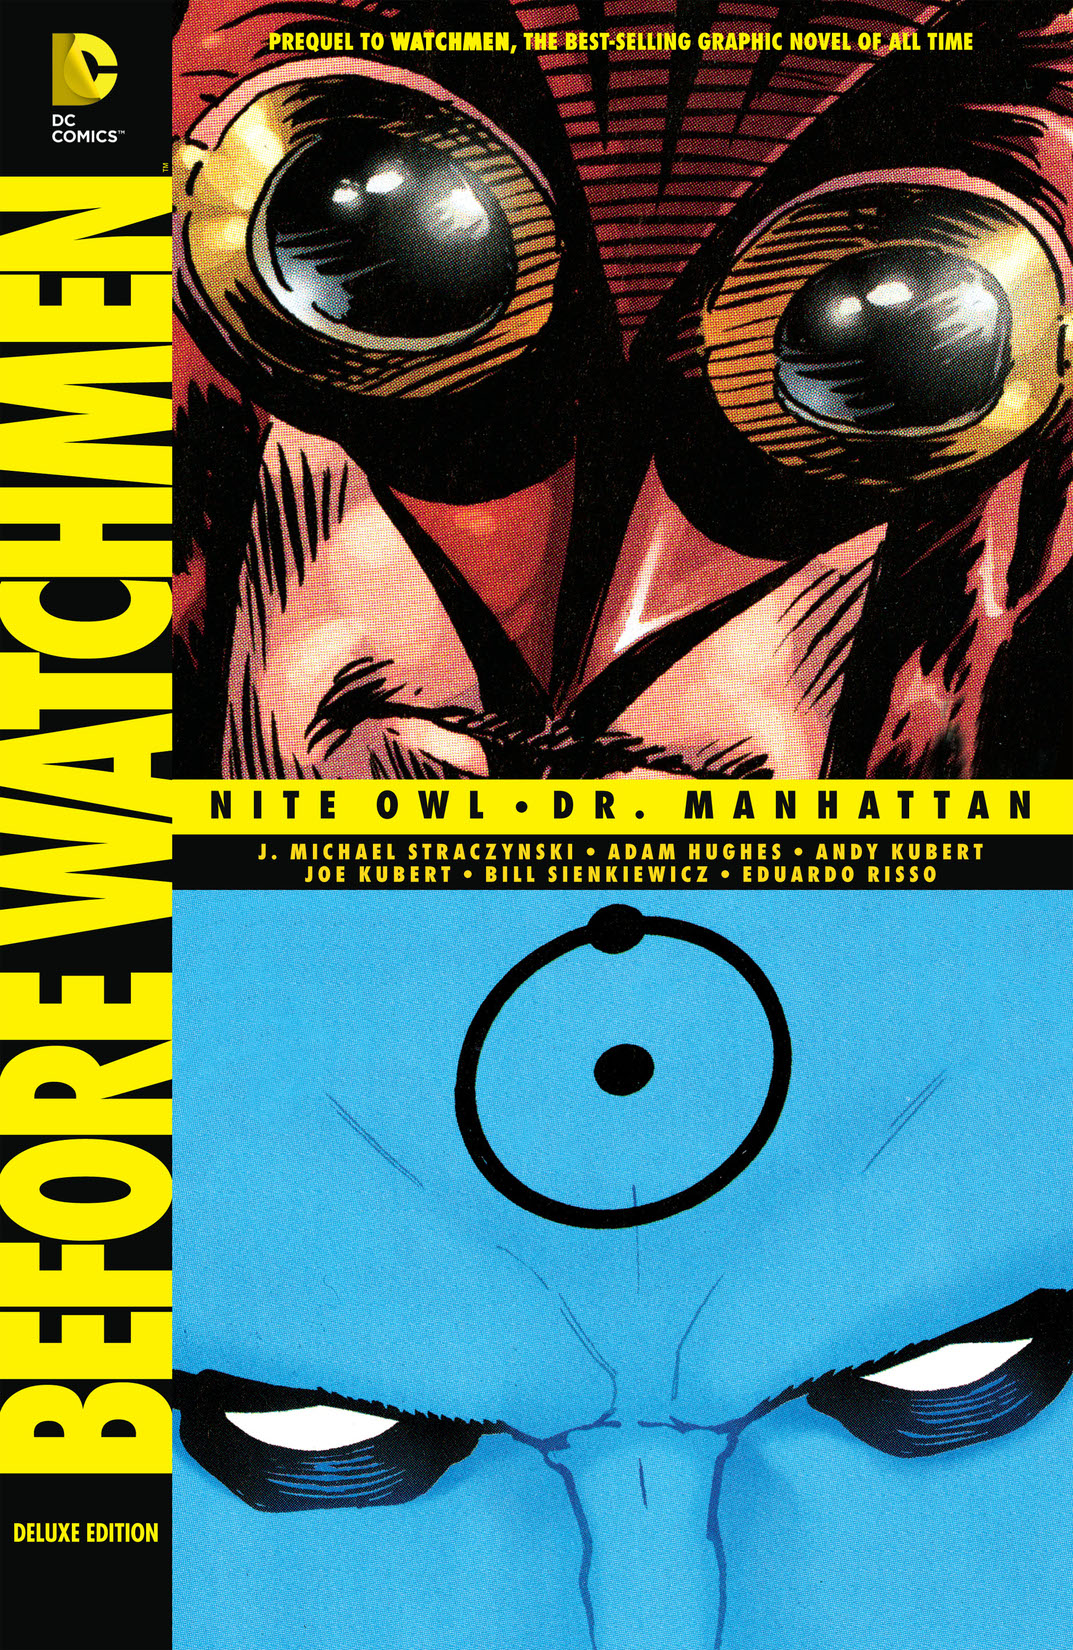 Before Watchmen: Nite Owl/Dr. Manhattan preview images